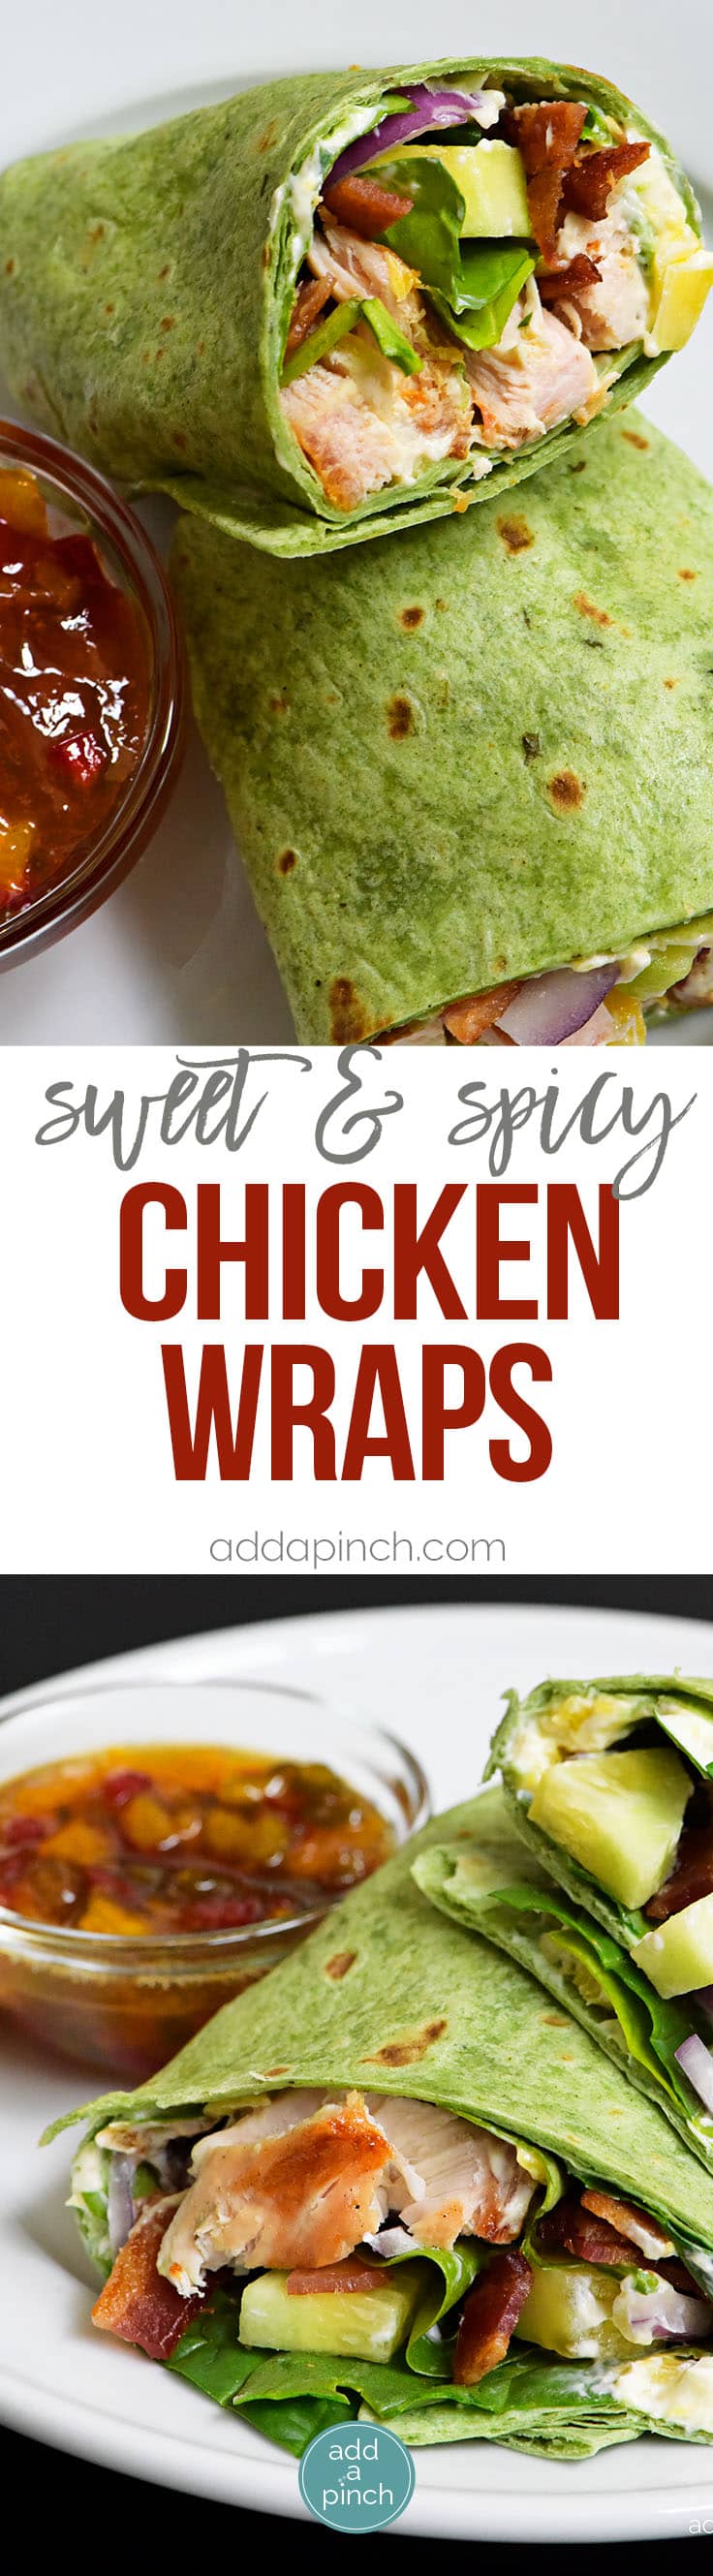 Sweet and Spicy Chicken Wraps - Quick, easy and oh so delicious! This chicken wraps recipe is made with chicken, bacon, cucumbers, red onions, and a special sweet and spicy spread! // addapinch.com